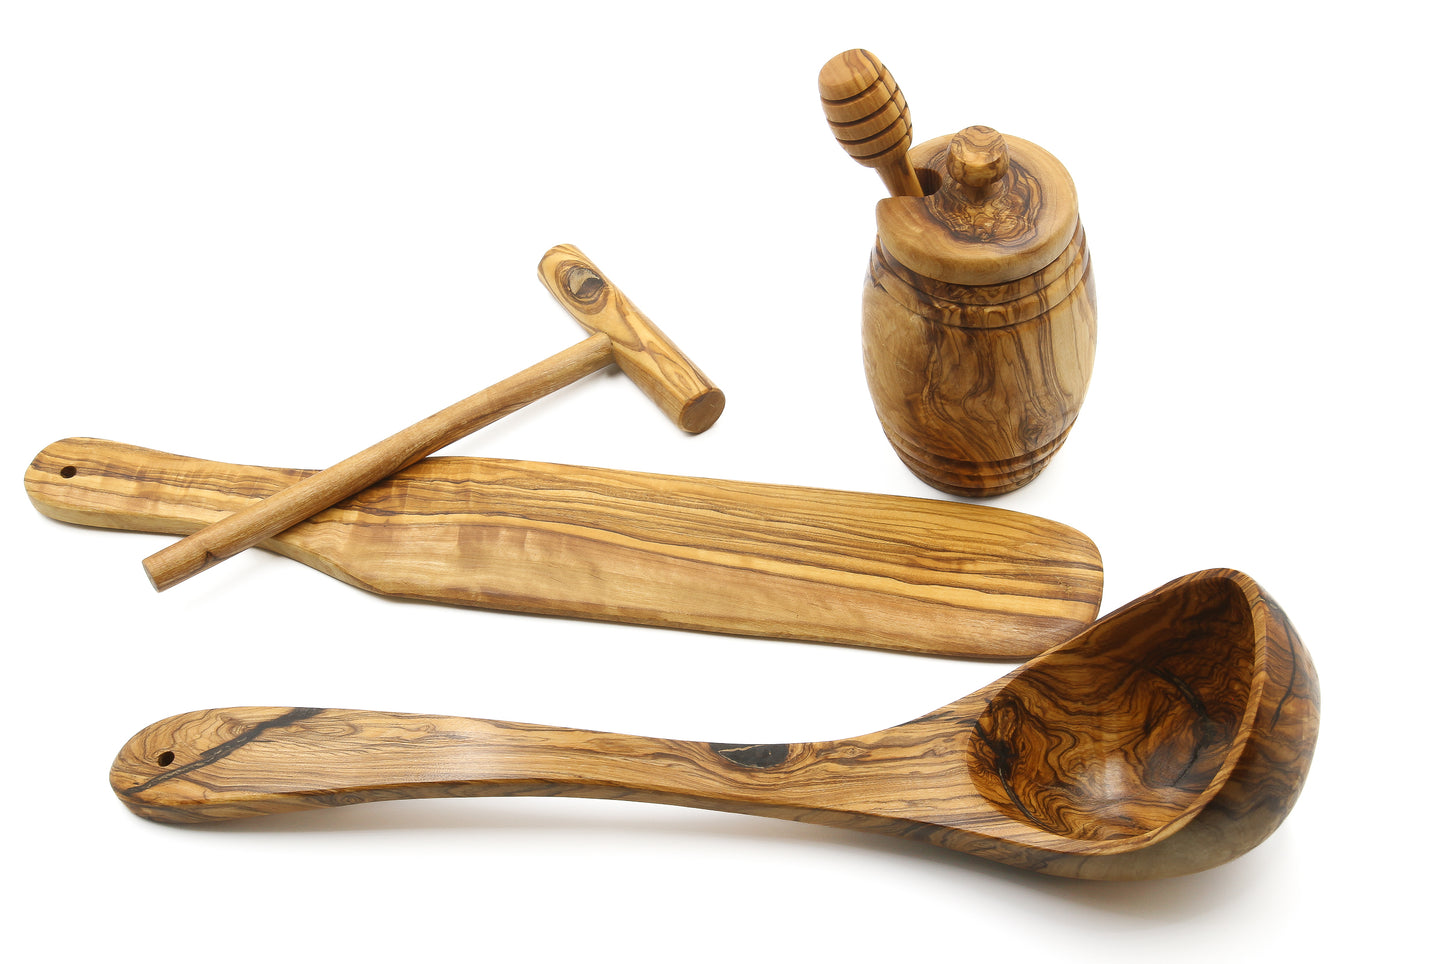 Discover the art of crepe and pancake making with the olive wood Master set